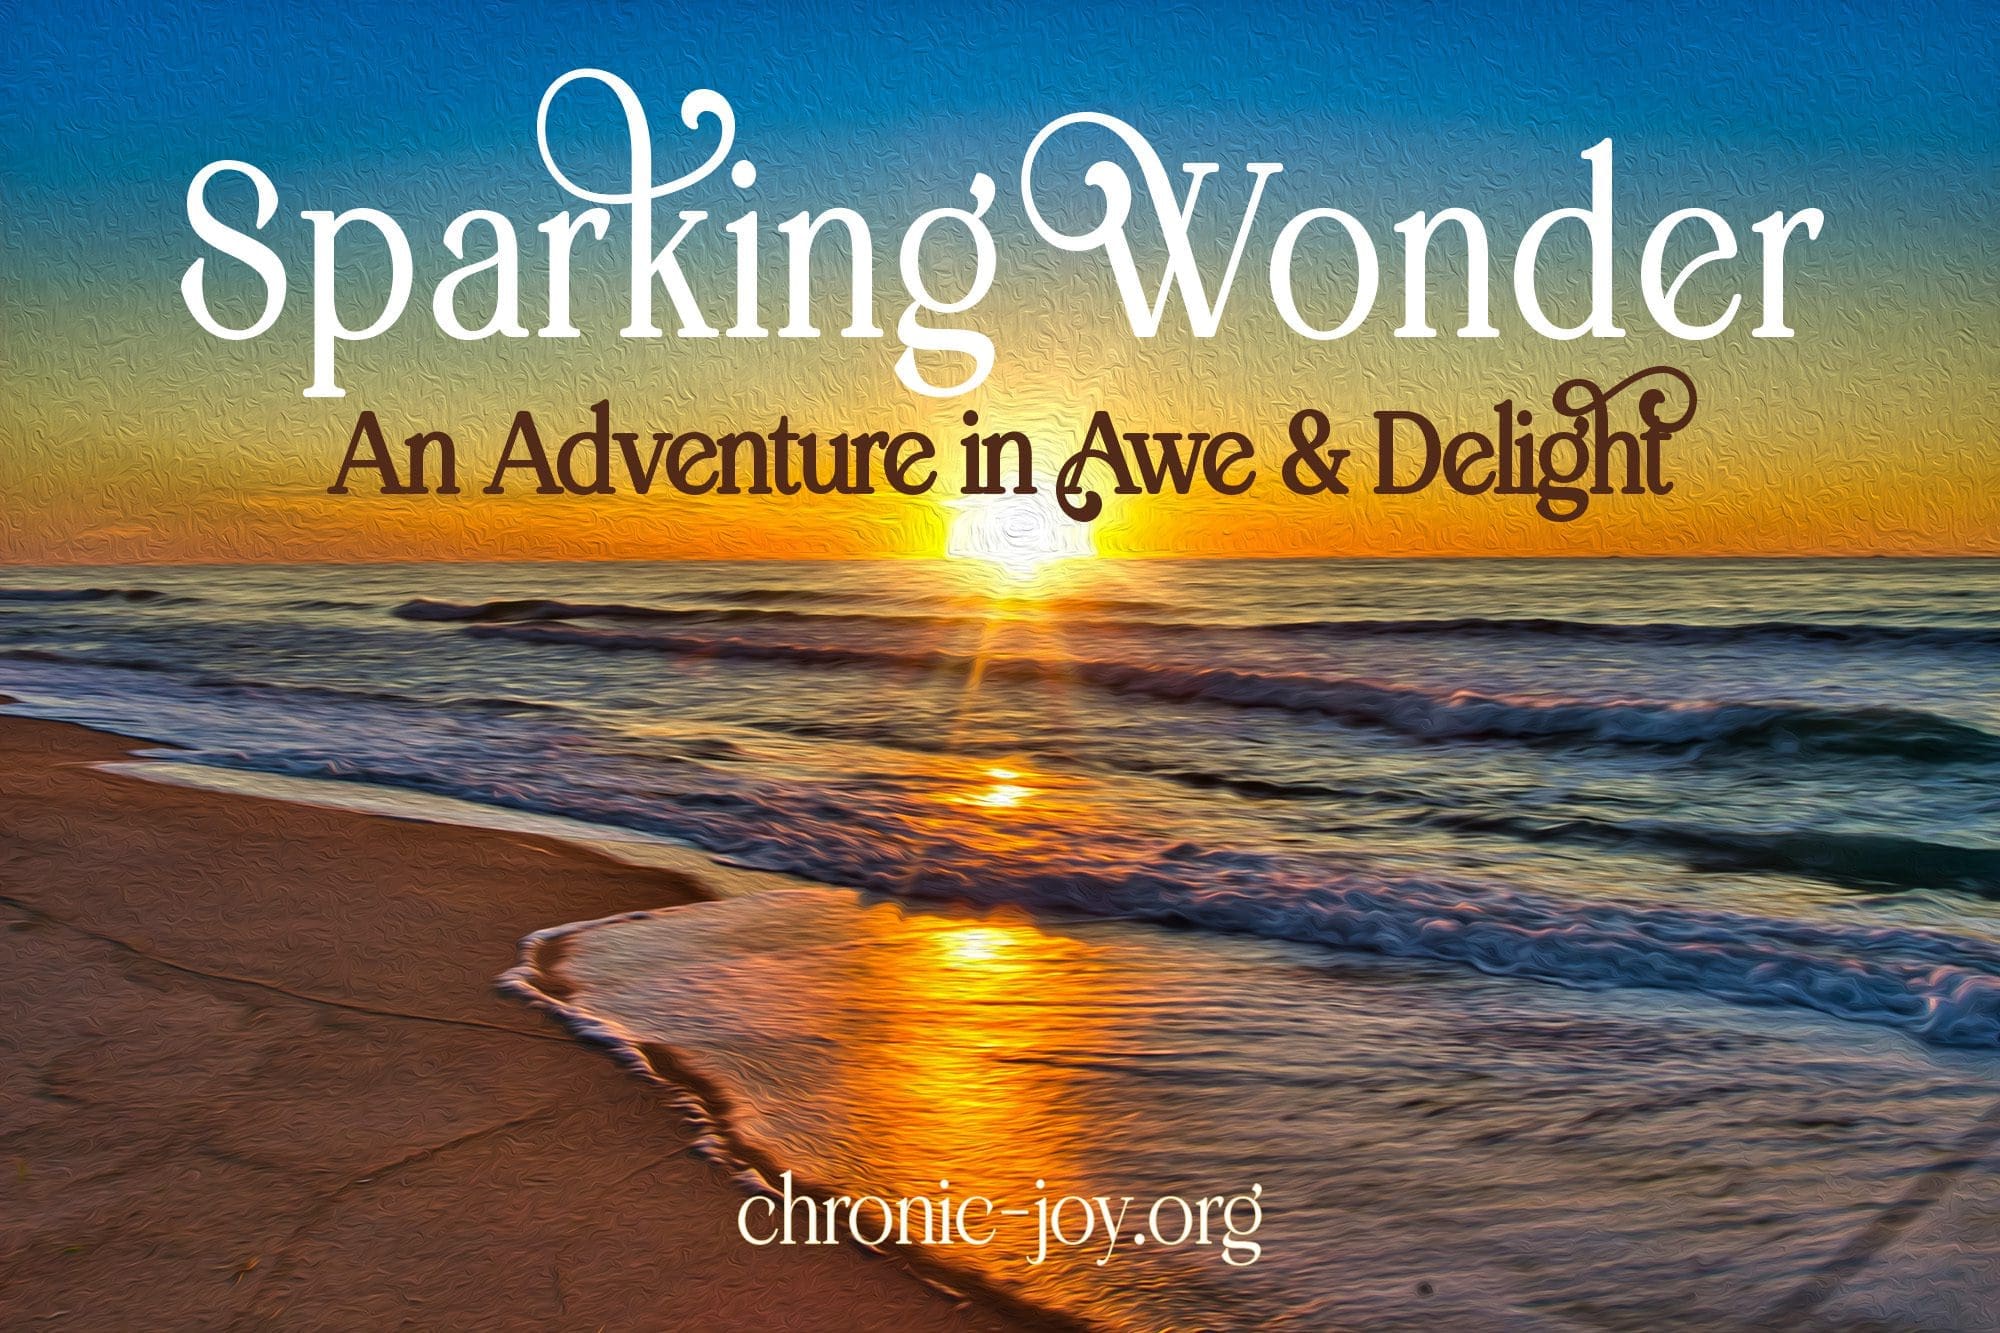 Sparking Wonder: An Adventure in Awe & Delight